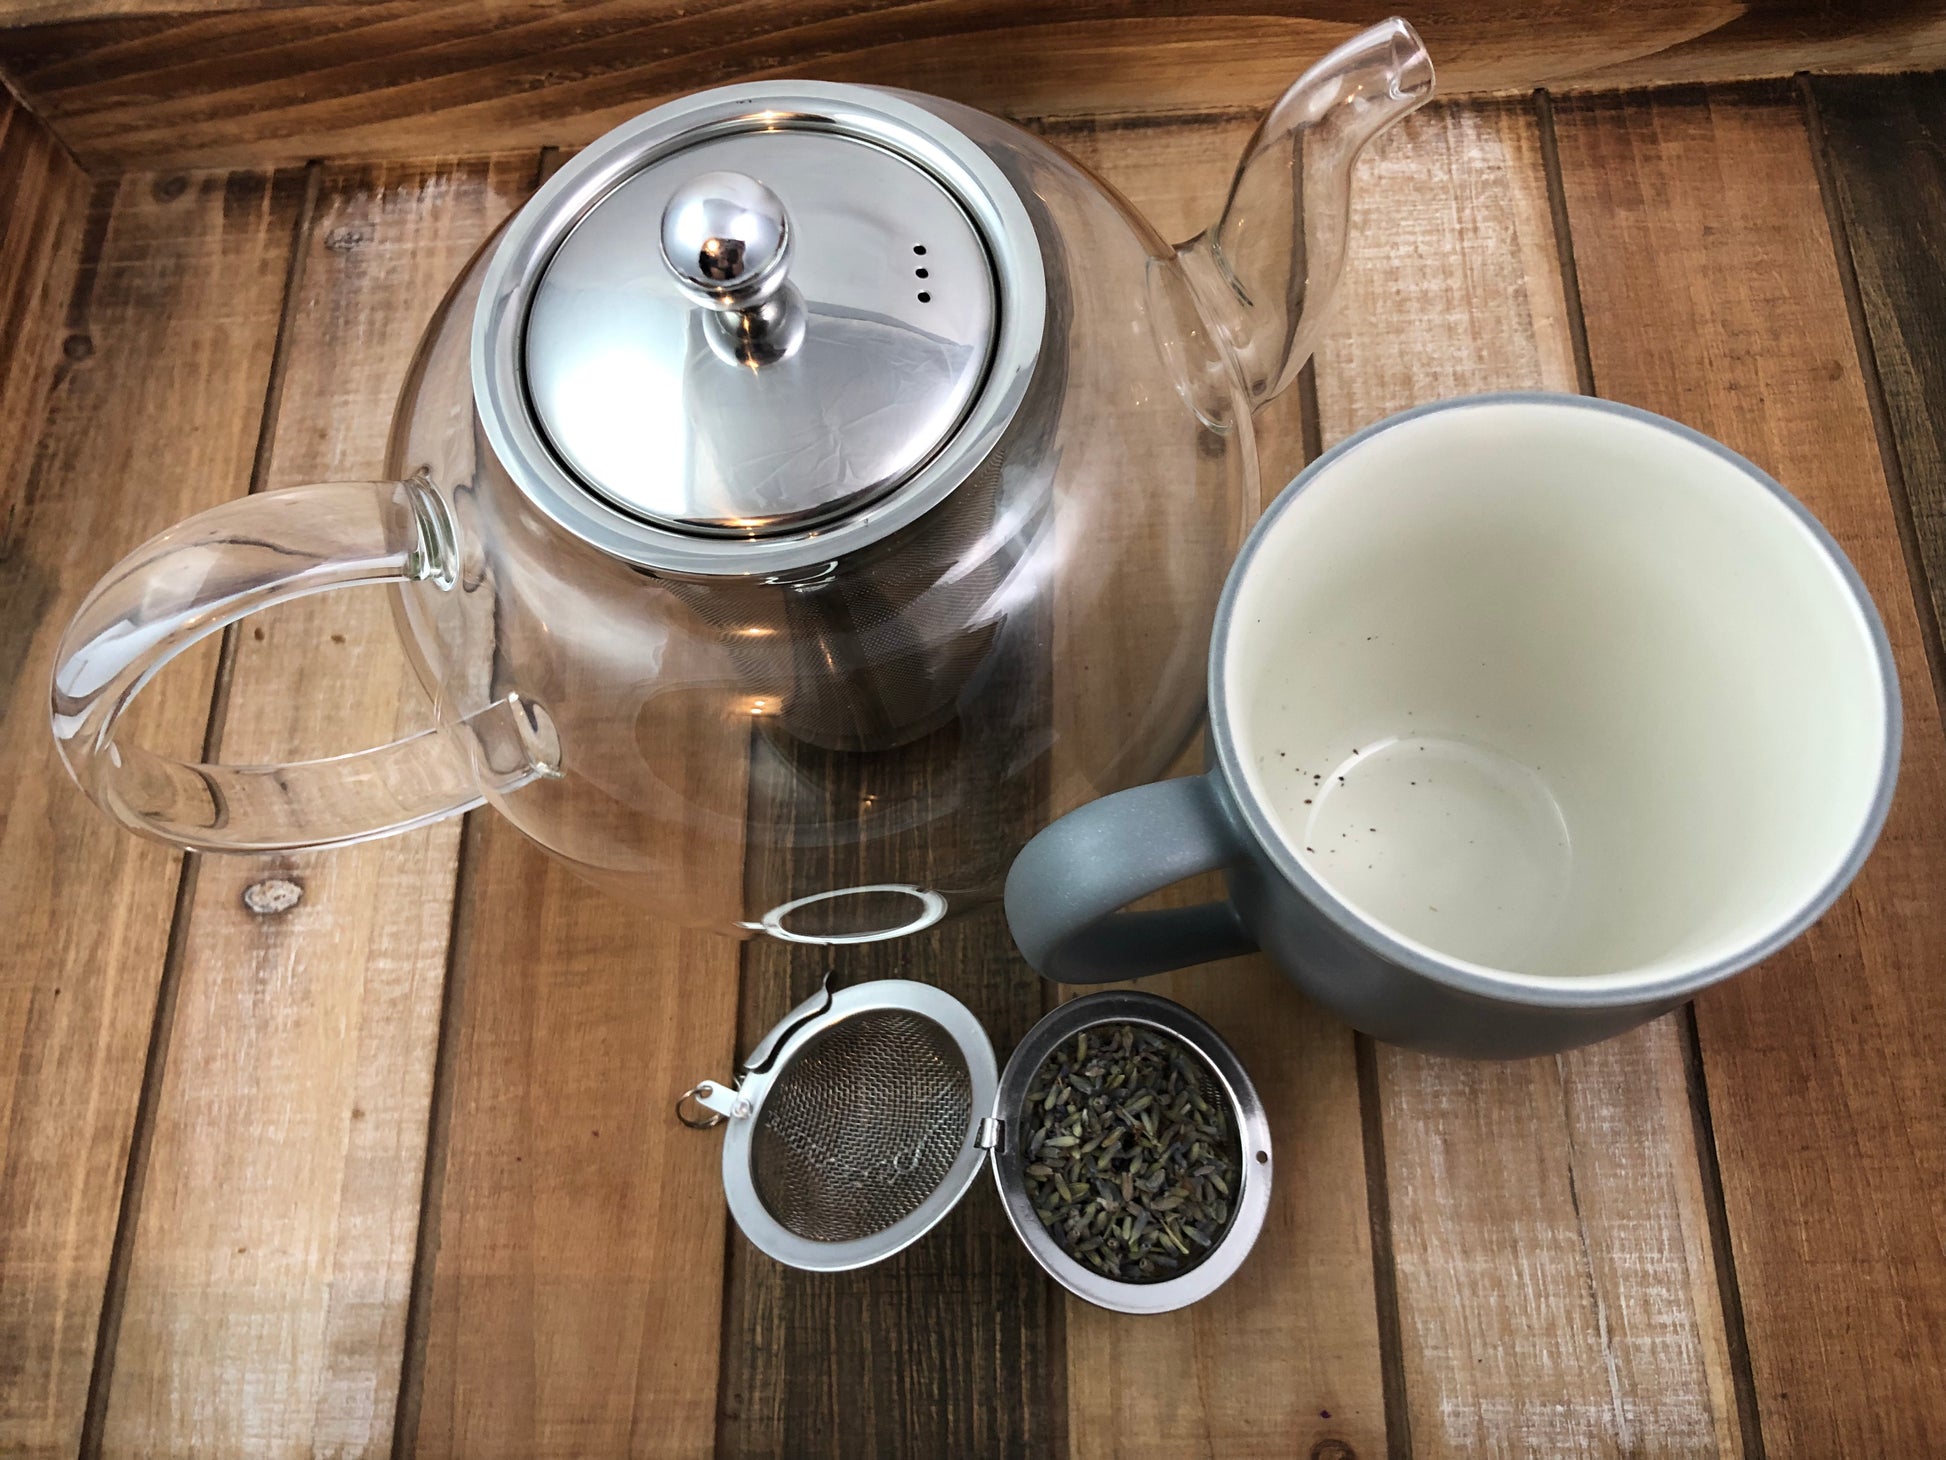 Ariel view of clear teapot, mesh tea infuser filled with dried lavender, next to a grey and white coffee mug on a wooden table as background